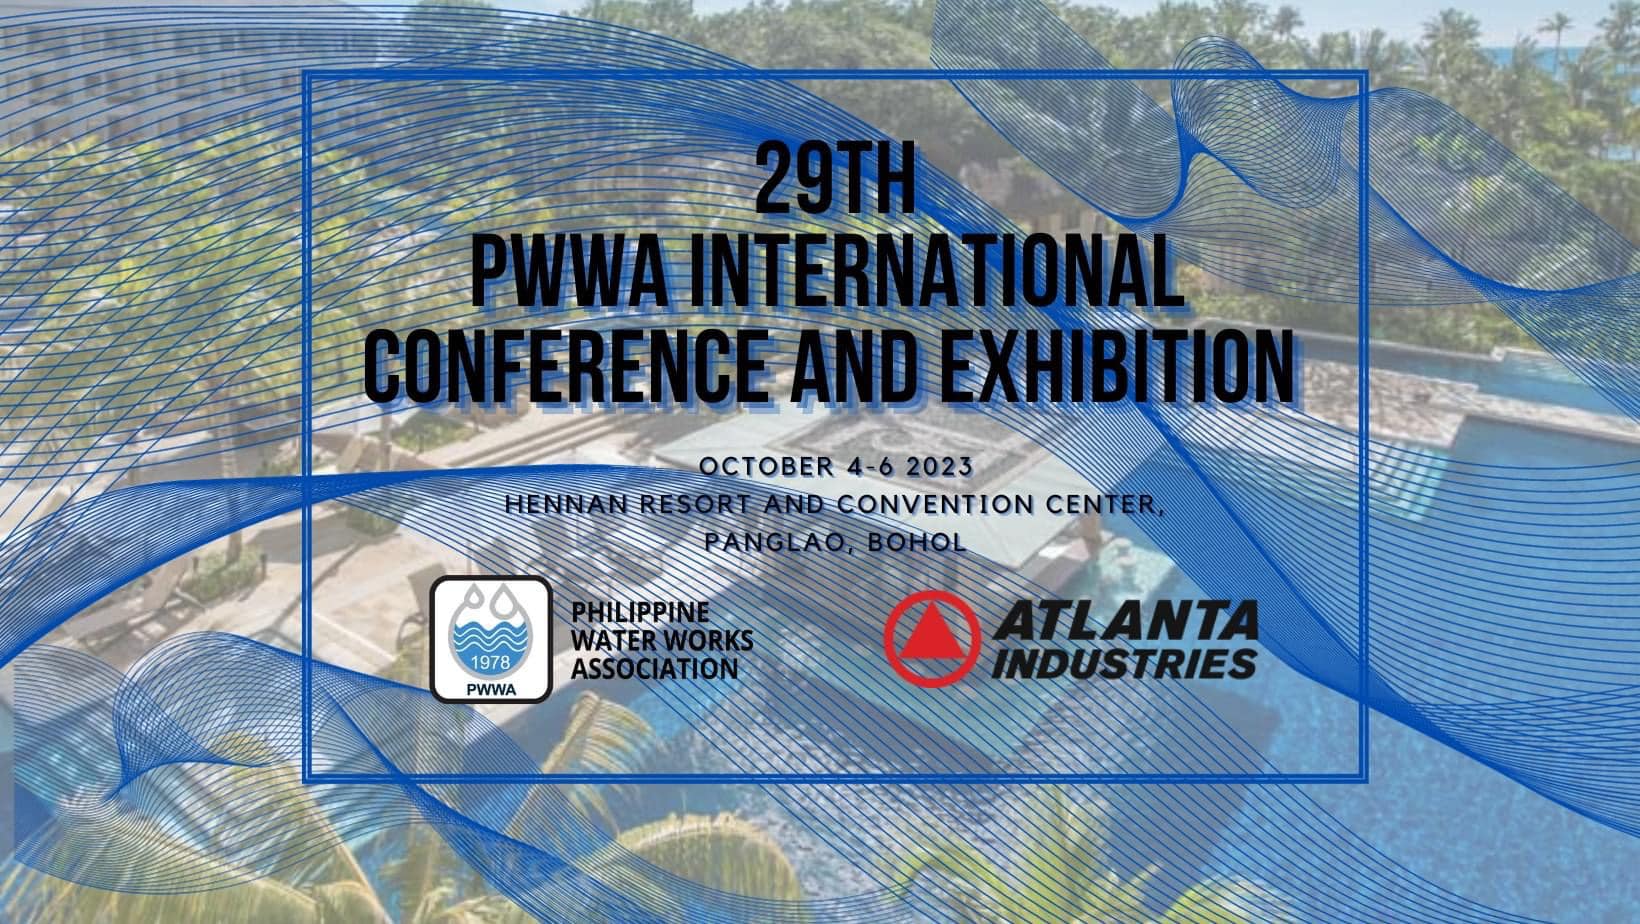 29th PWWA International Conference and Exhibition 2023 at Henann Resort and Convention Center